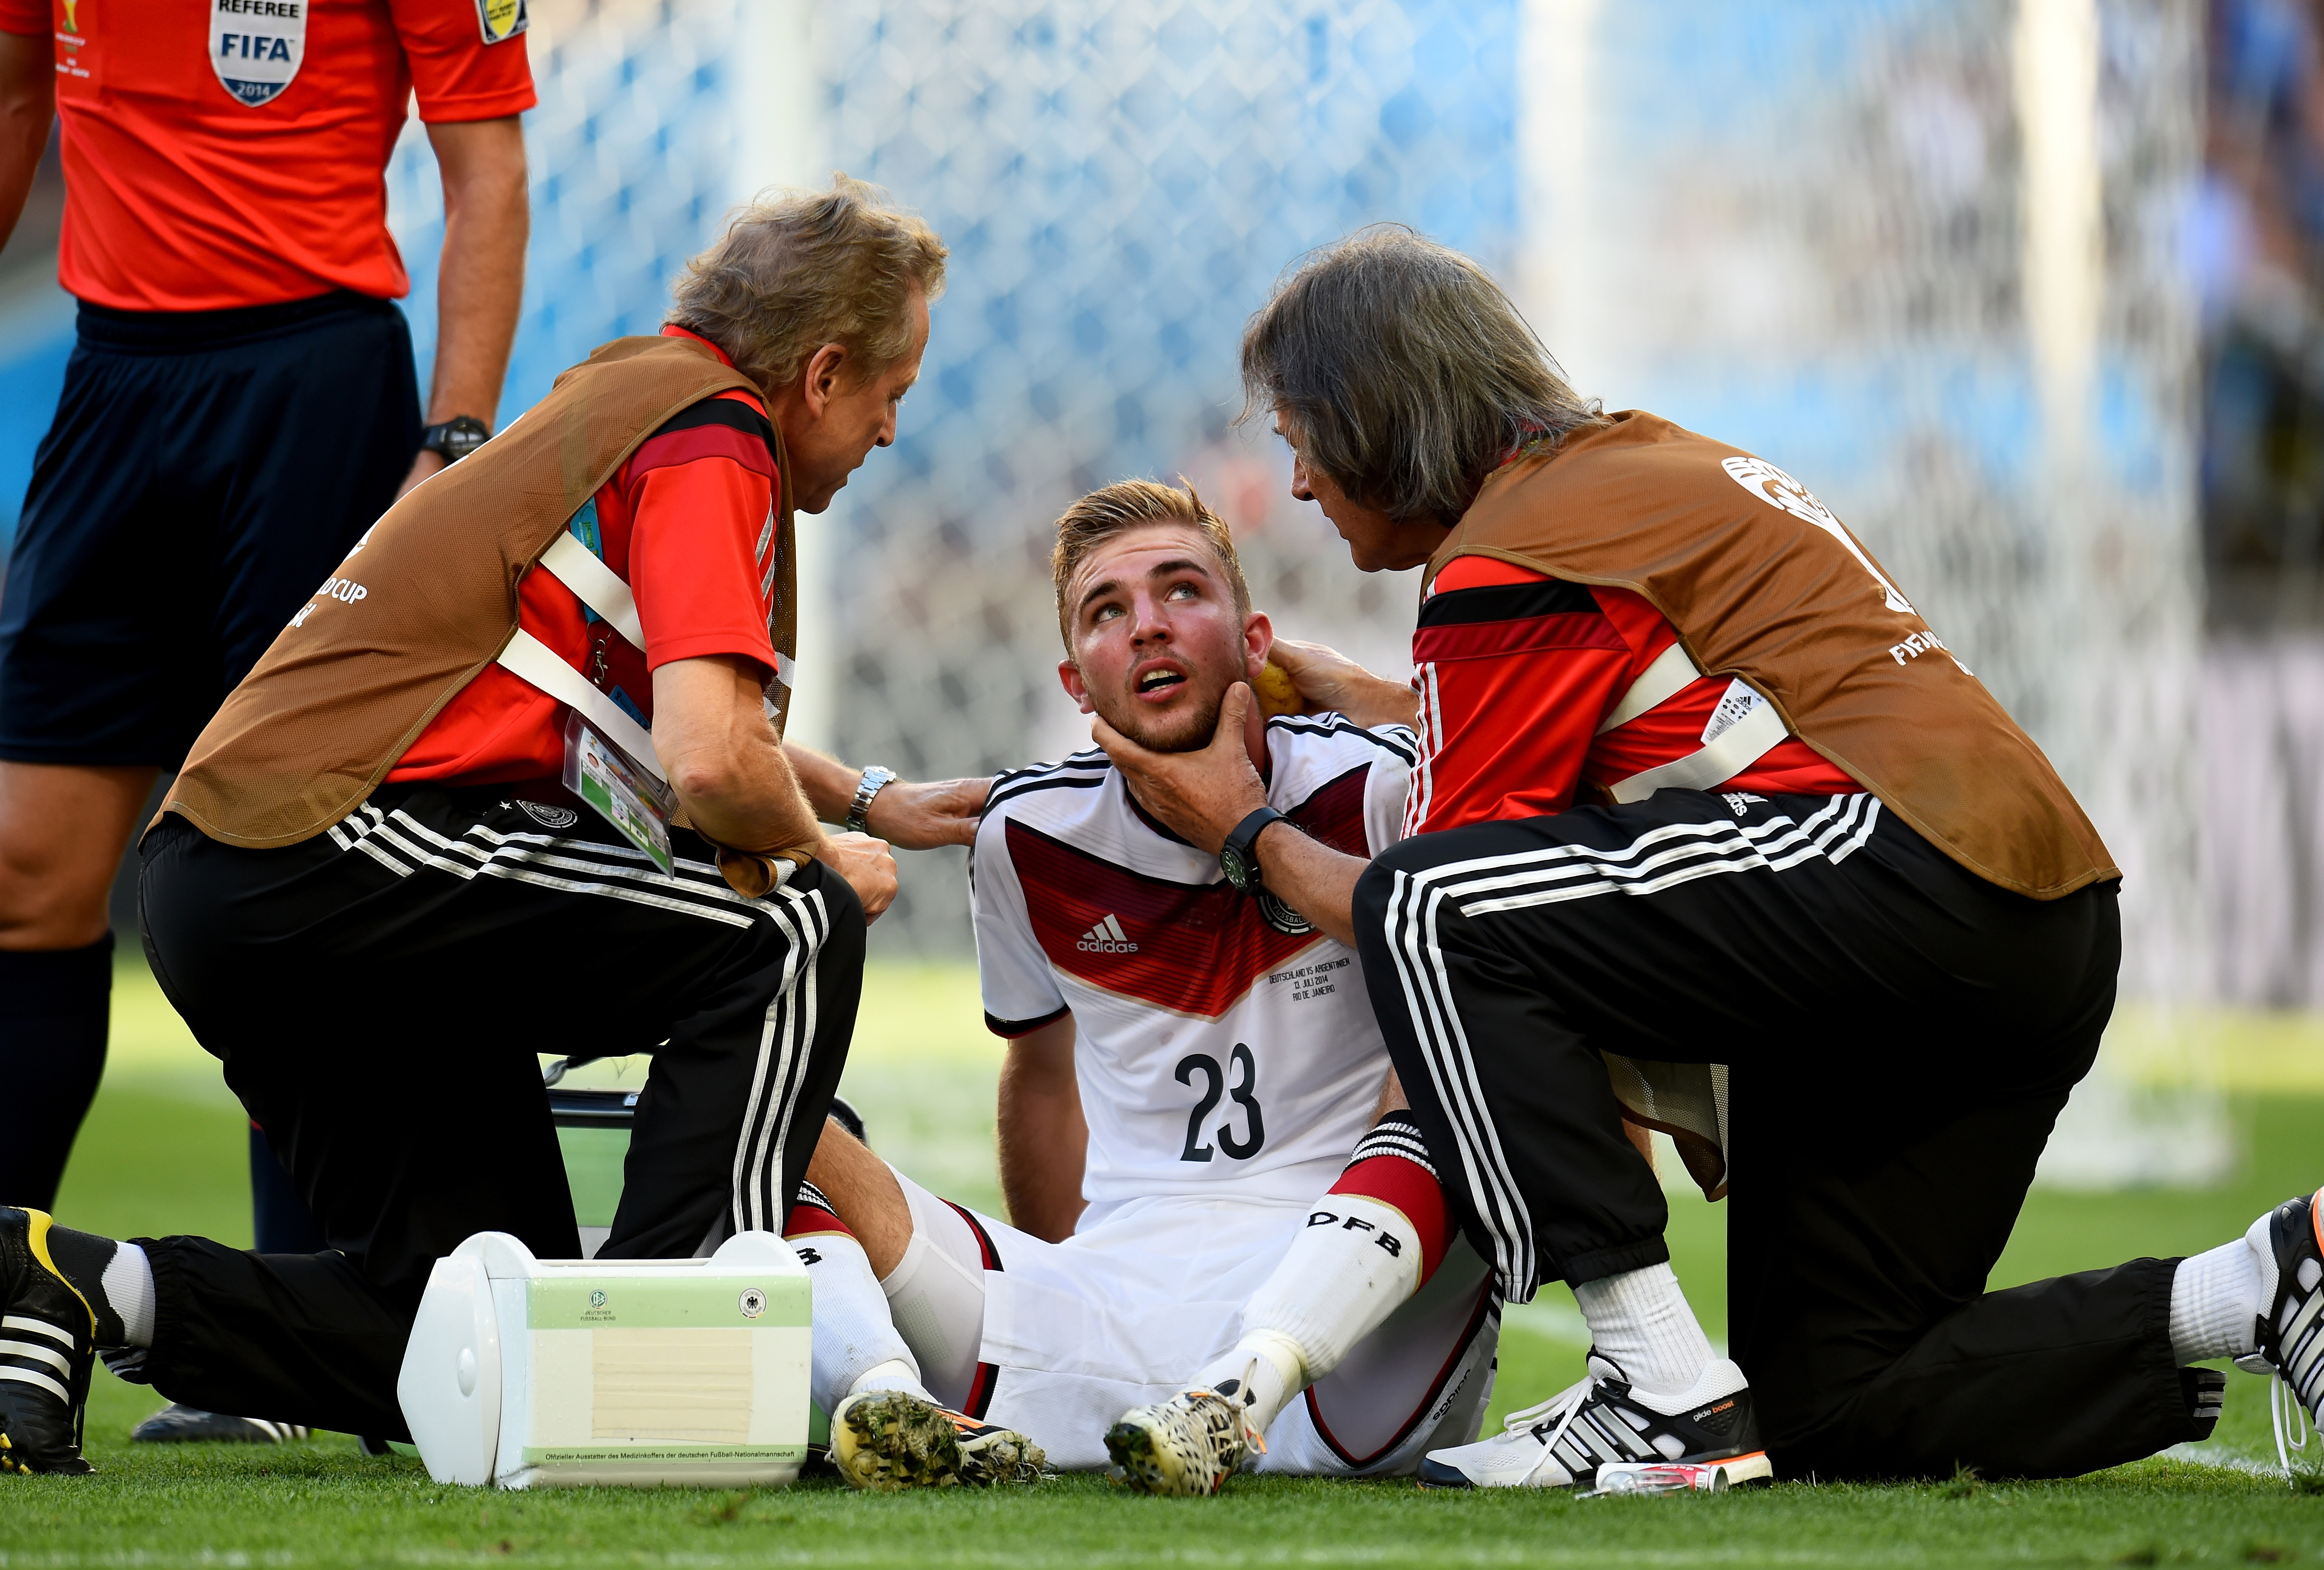 Christoph Kramer of Germany receives a medical treatment during the 2014 FIFA World Cup Brazil Final match between Germany and Argentina on July 13, 2014 in Rio de Janeiro. (Shaun Botterill—FIFA/Getty Images)